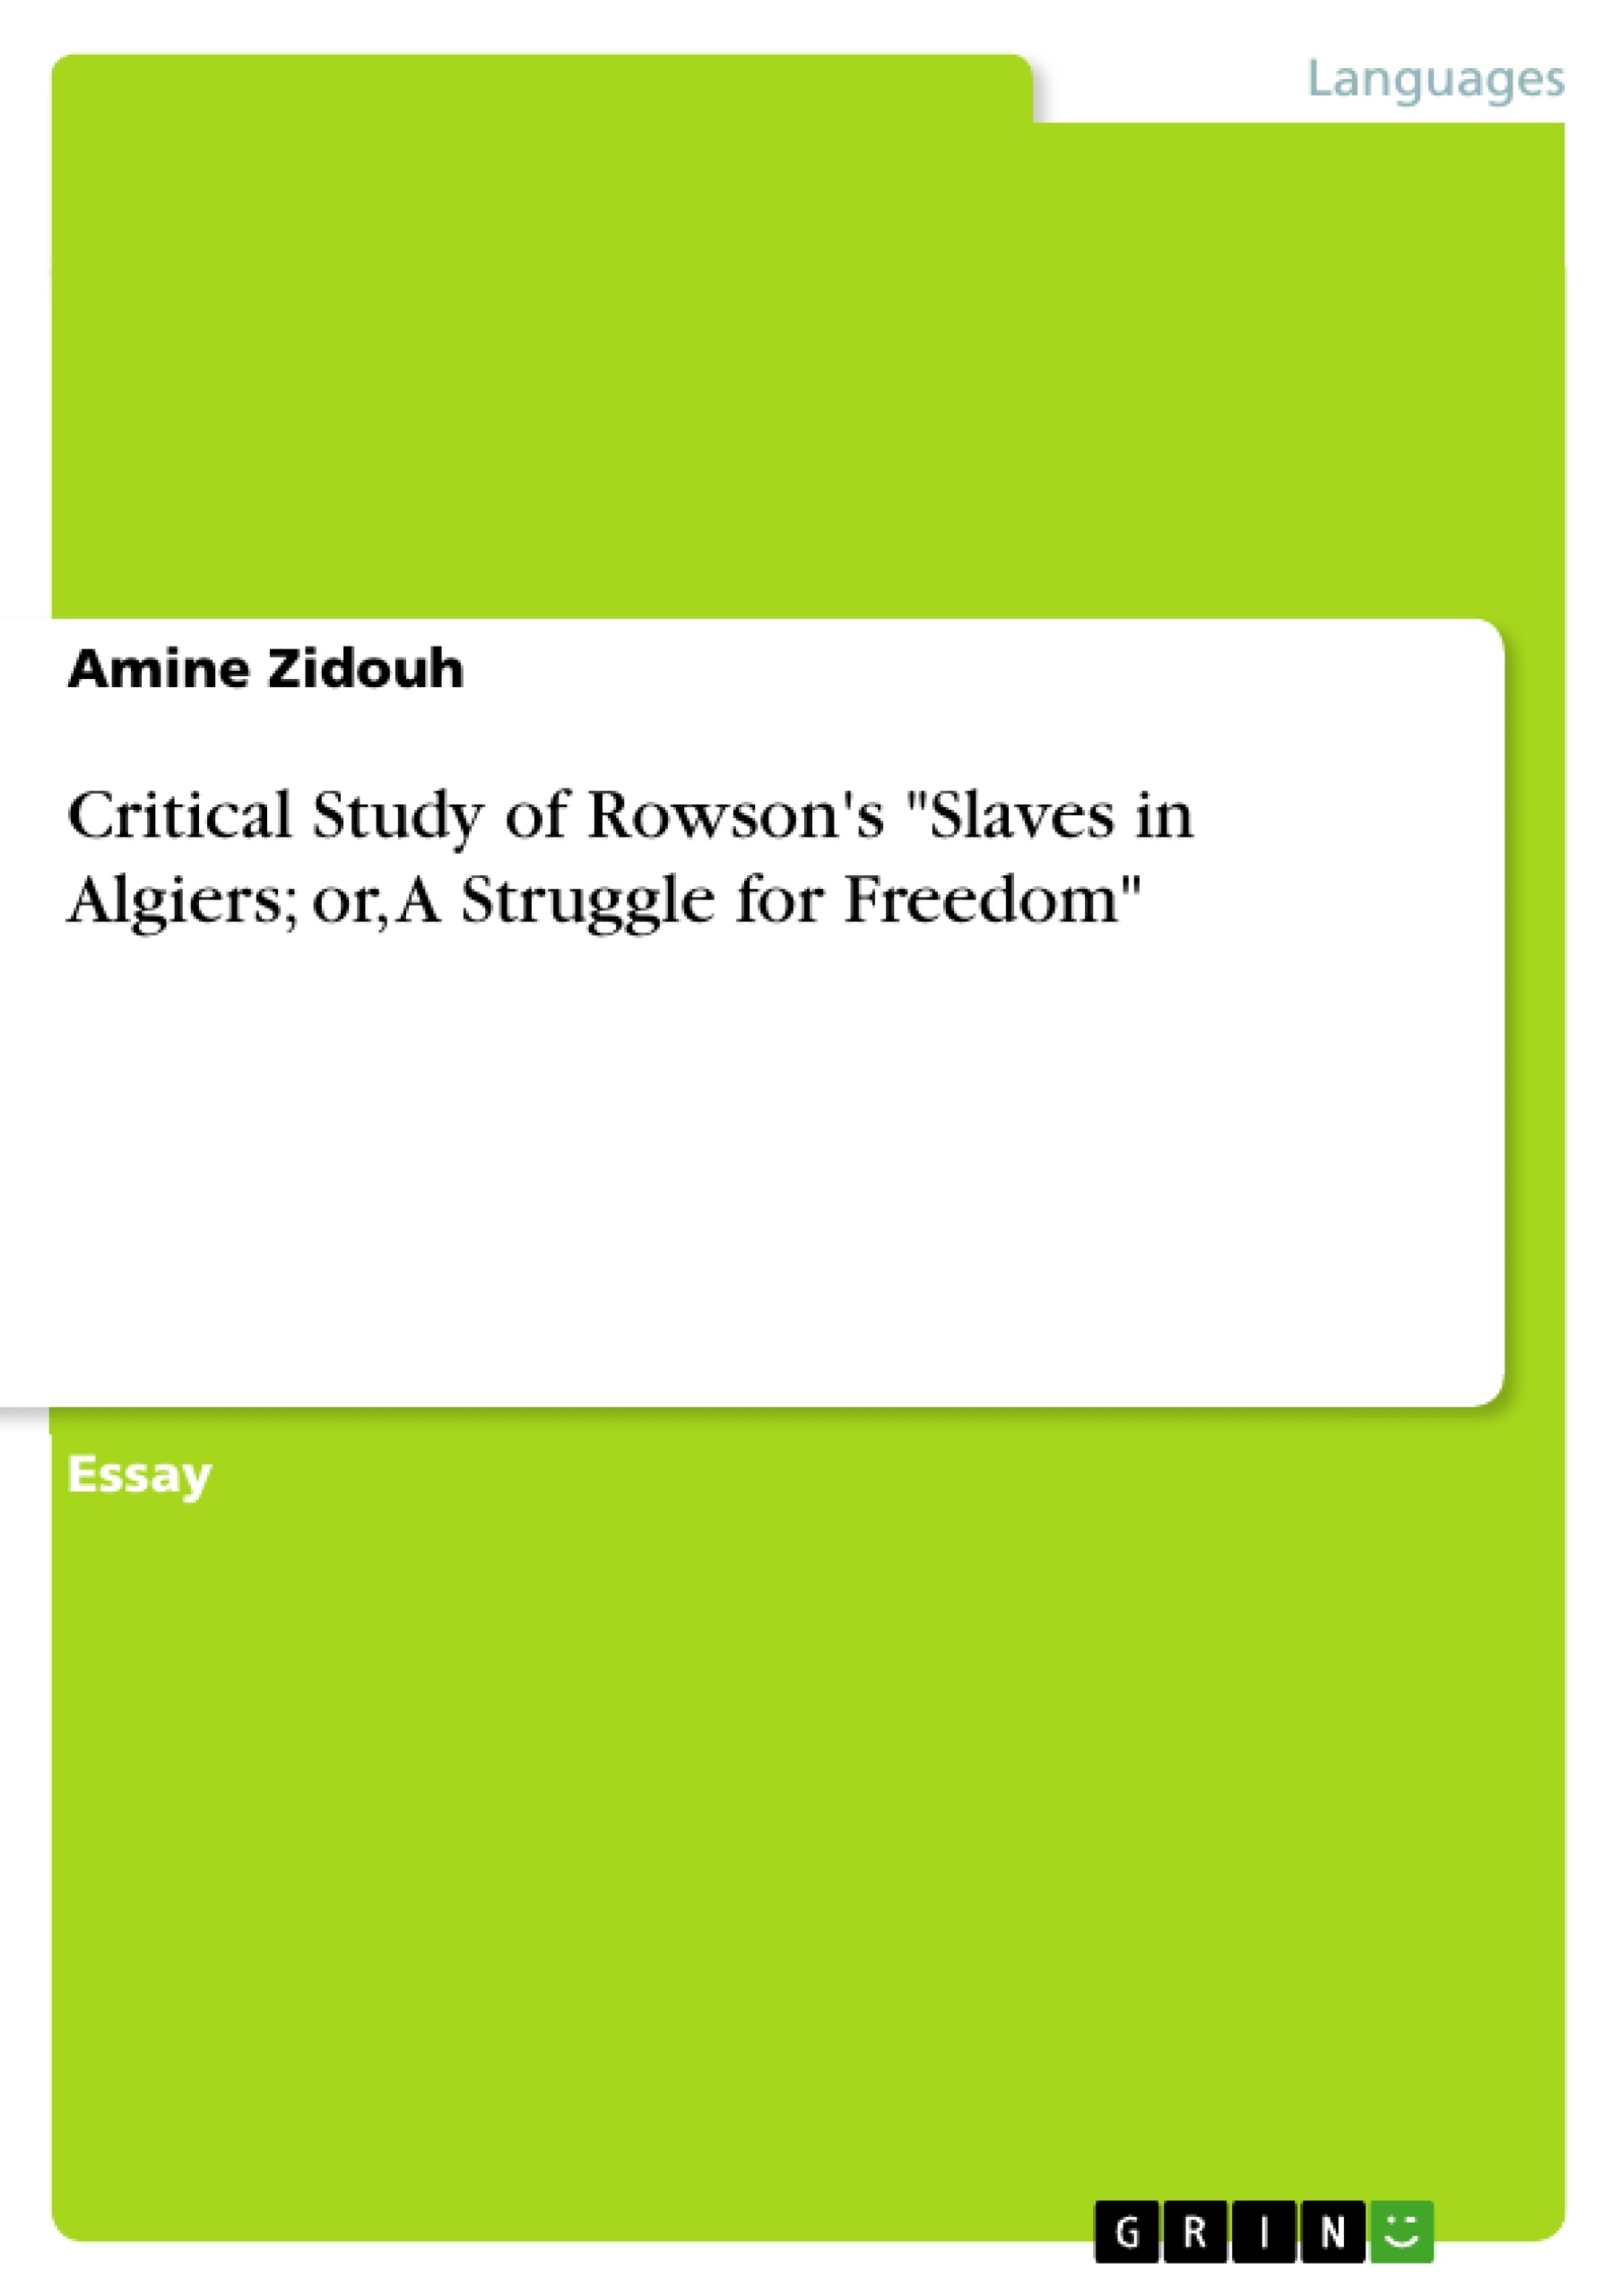 Titel: Critical Study of Rowson's "Slaves in Algiers; or, A Struggle for Freedom"